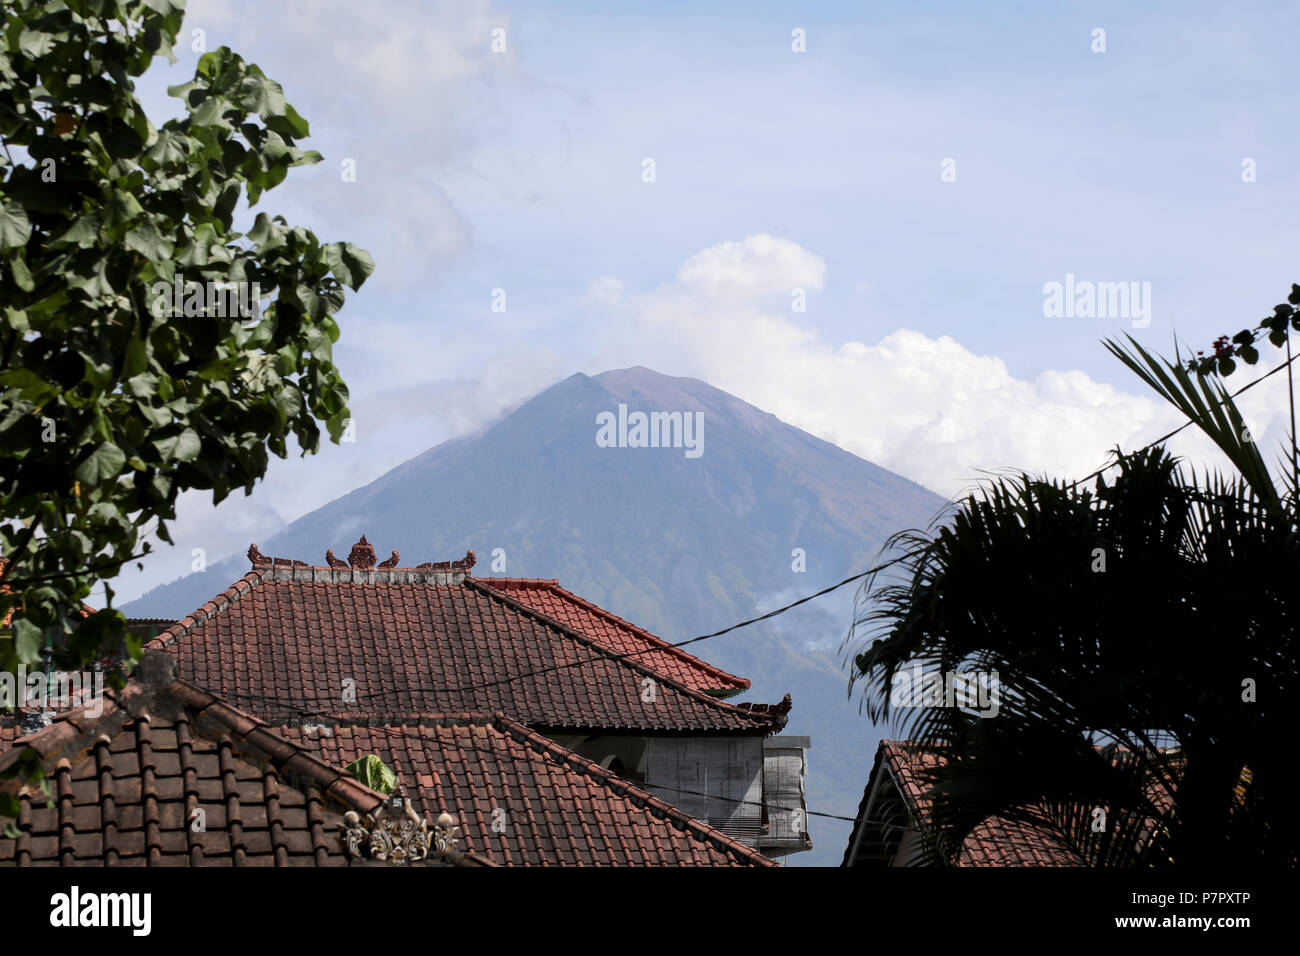 Amed, Indonesia – July 3 2018: The volcano of Mount Agung rises above the rooftops of a village in east Bali, Indonesia Stock Photo